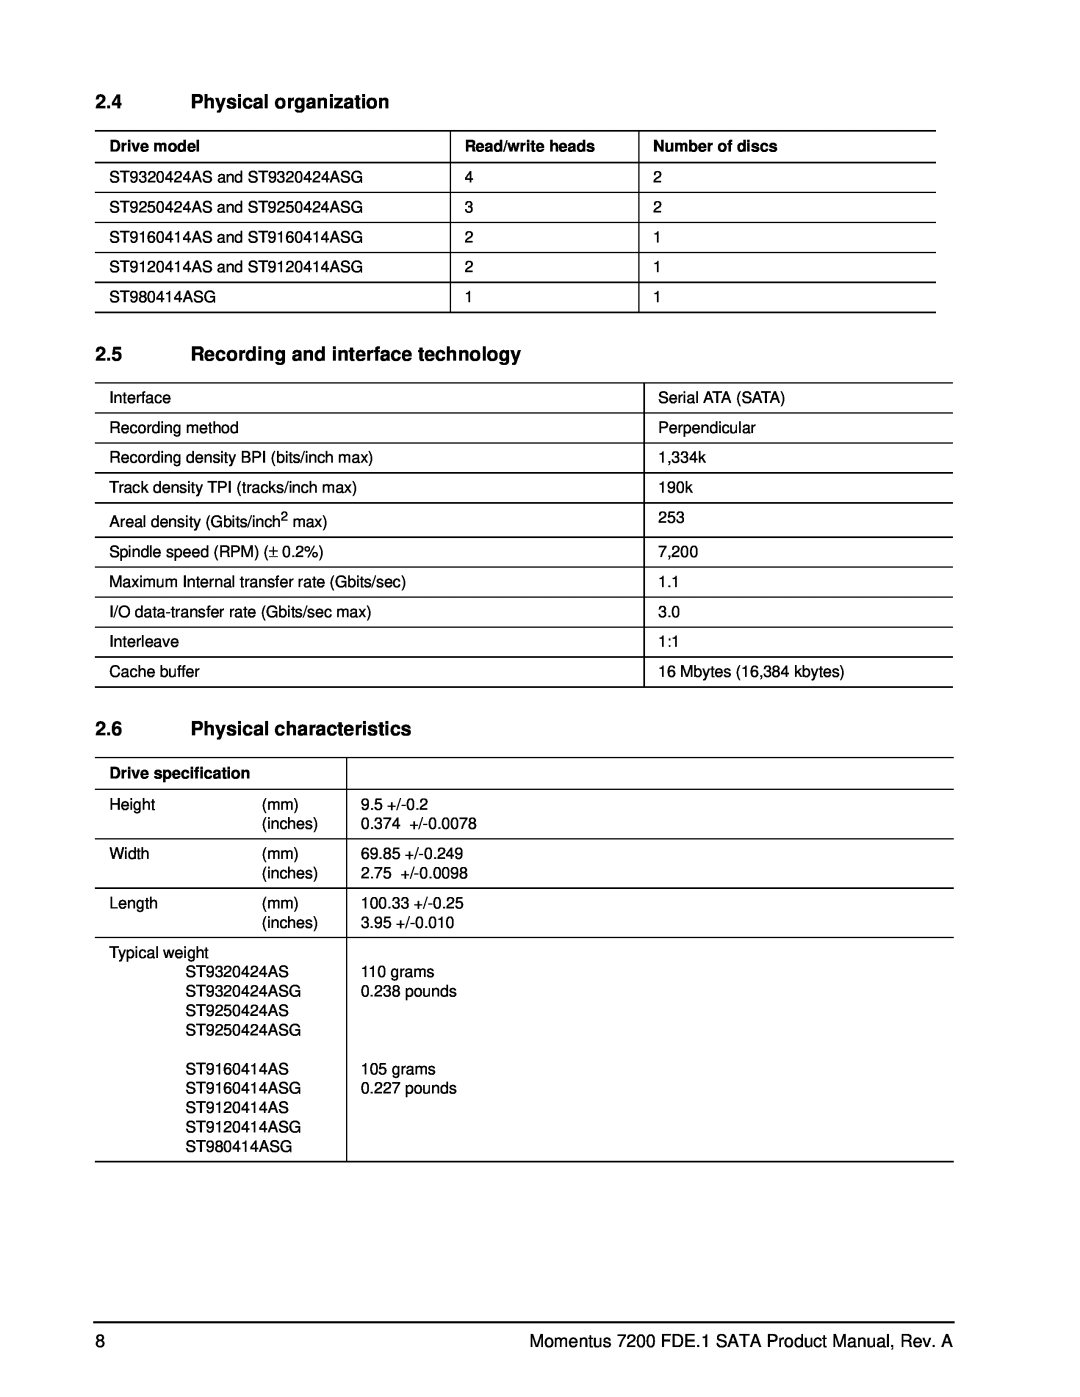 Seagate ST9160414ASG, ST980414ASG manual Physical organization, Recording and interface technology, Physical characteristics 